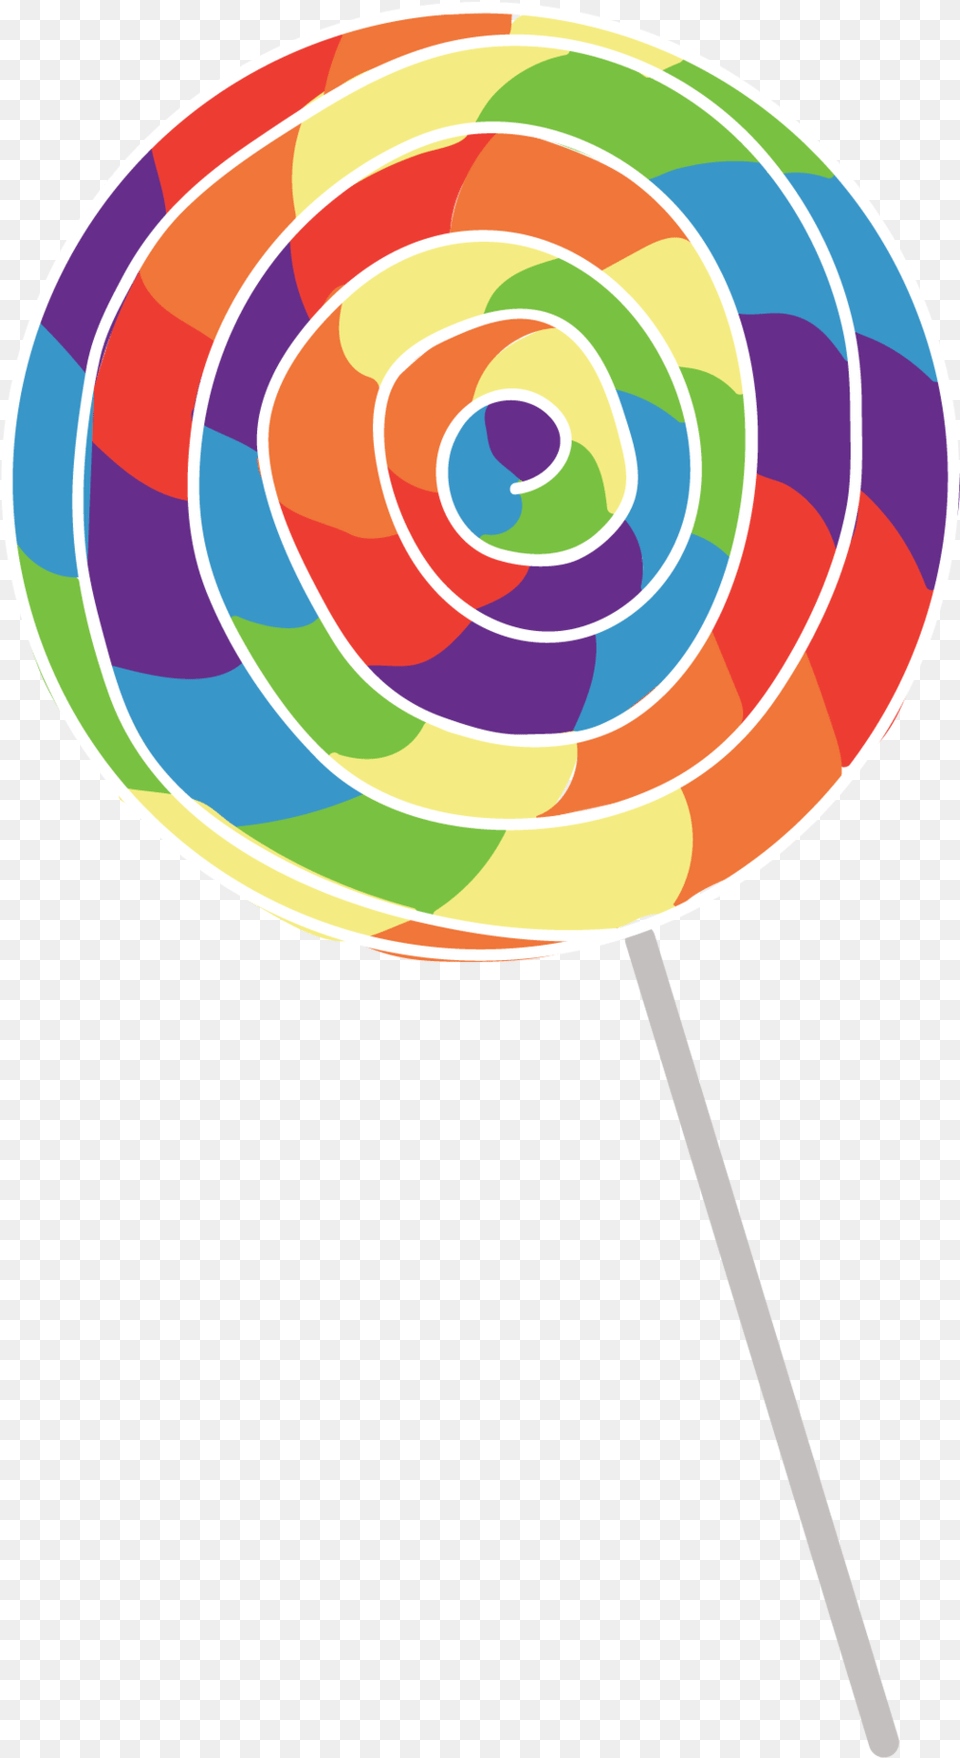 Download Rainbow Lollildpi Circle With No Rainbow Lollipop Clipart, Candy, Food, Sweets Free Png